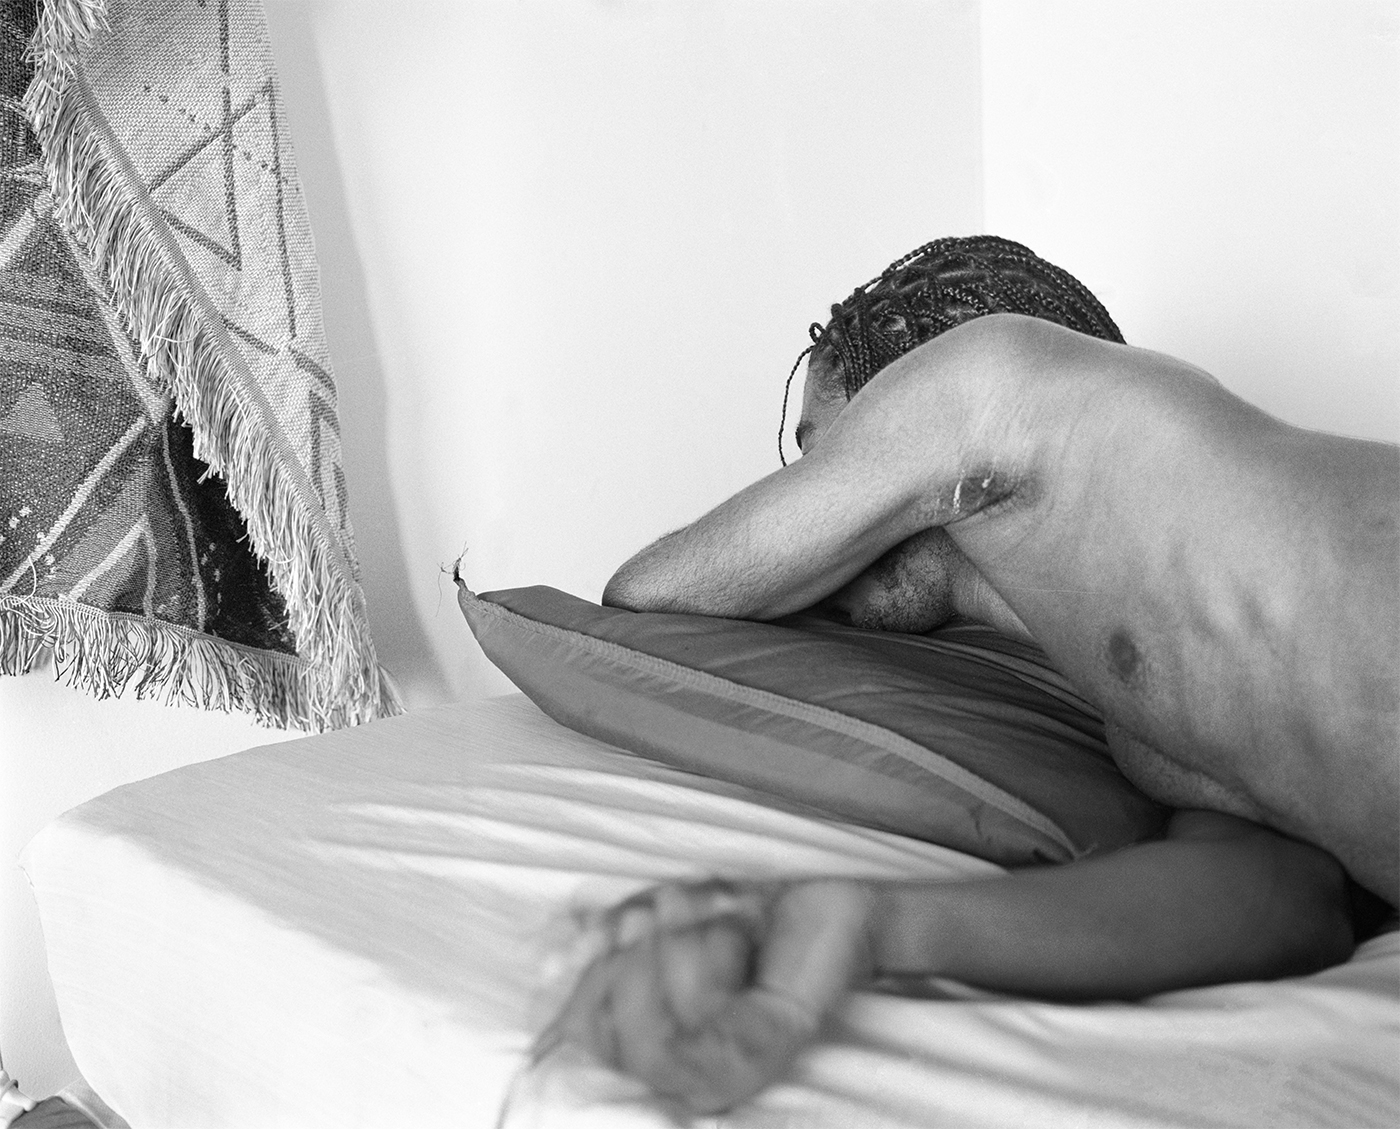 Photograph; a Black person lying on their side on a pillow with one arm covering their face and the other blurring into the foreground.